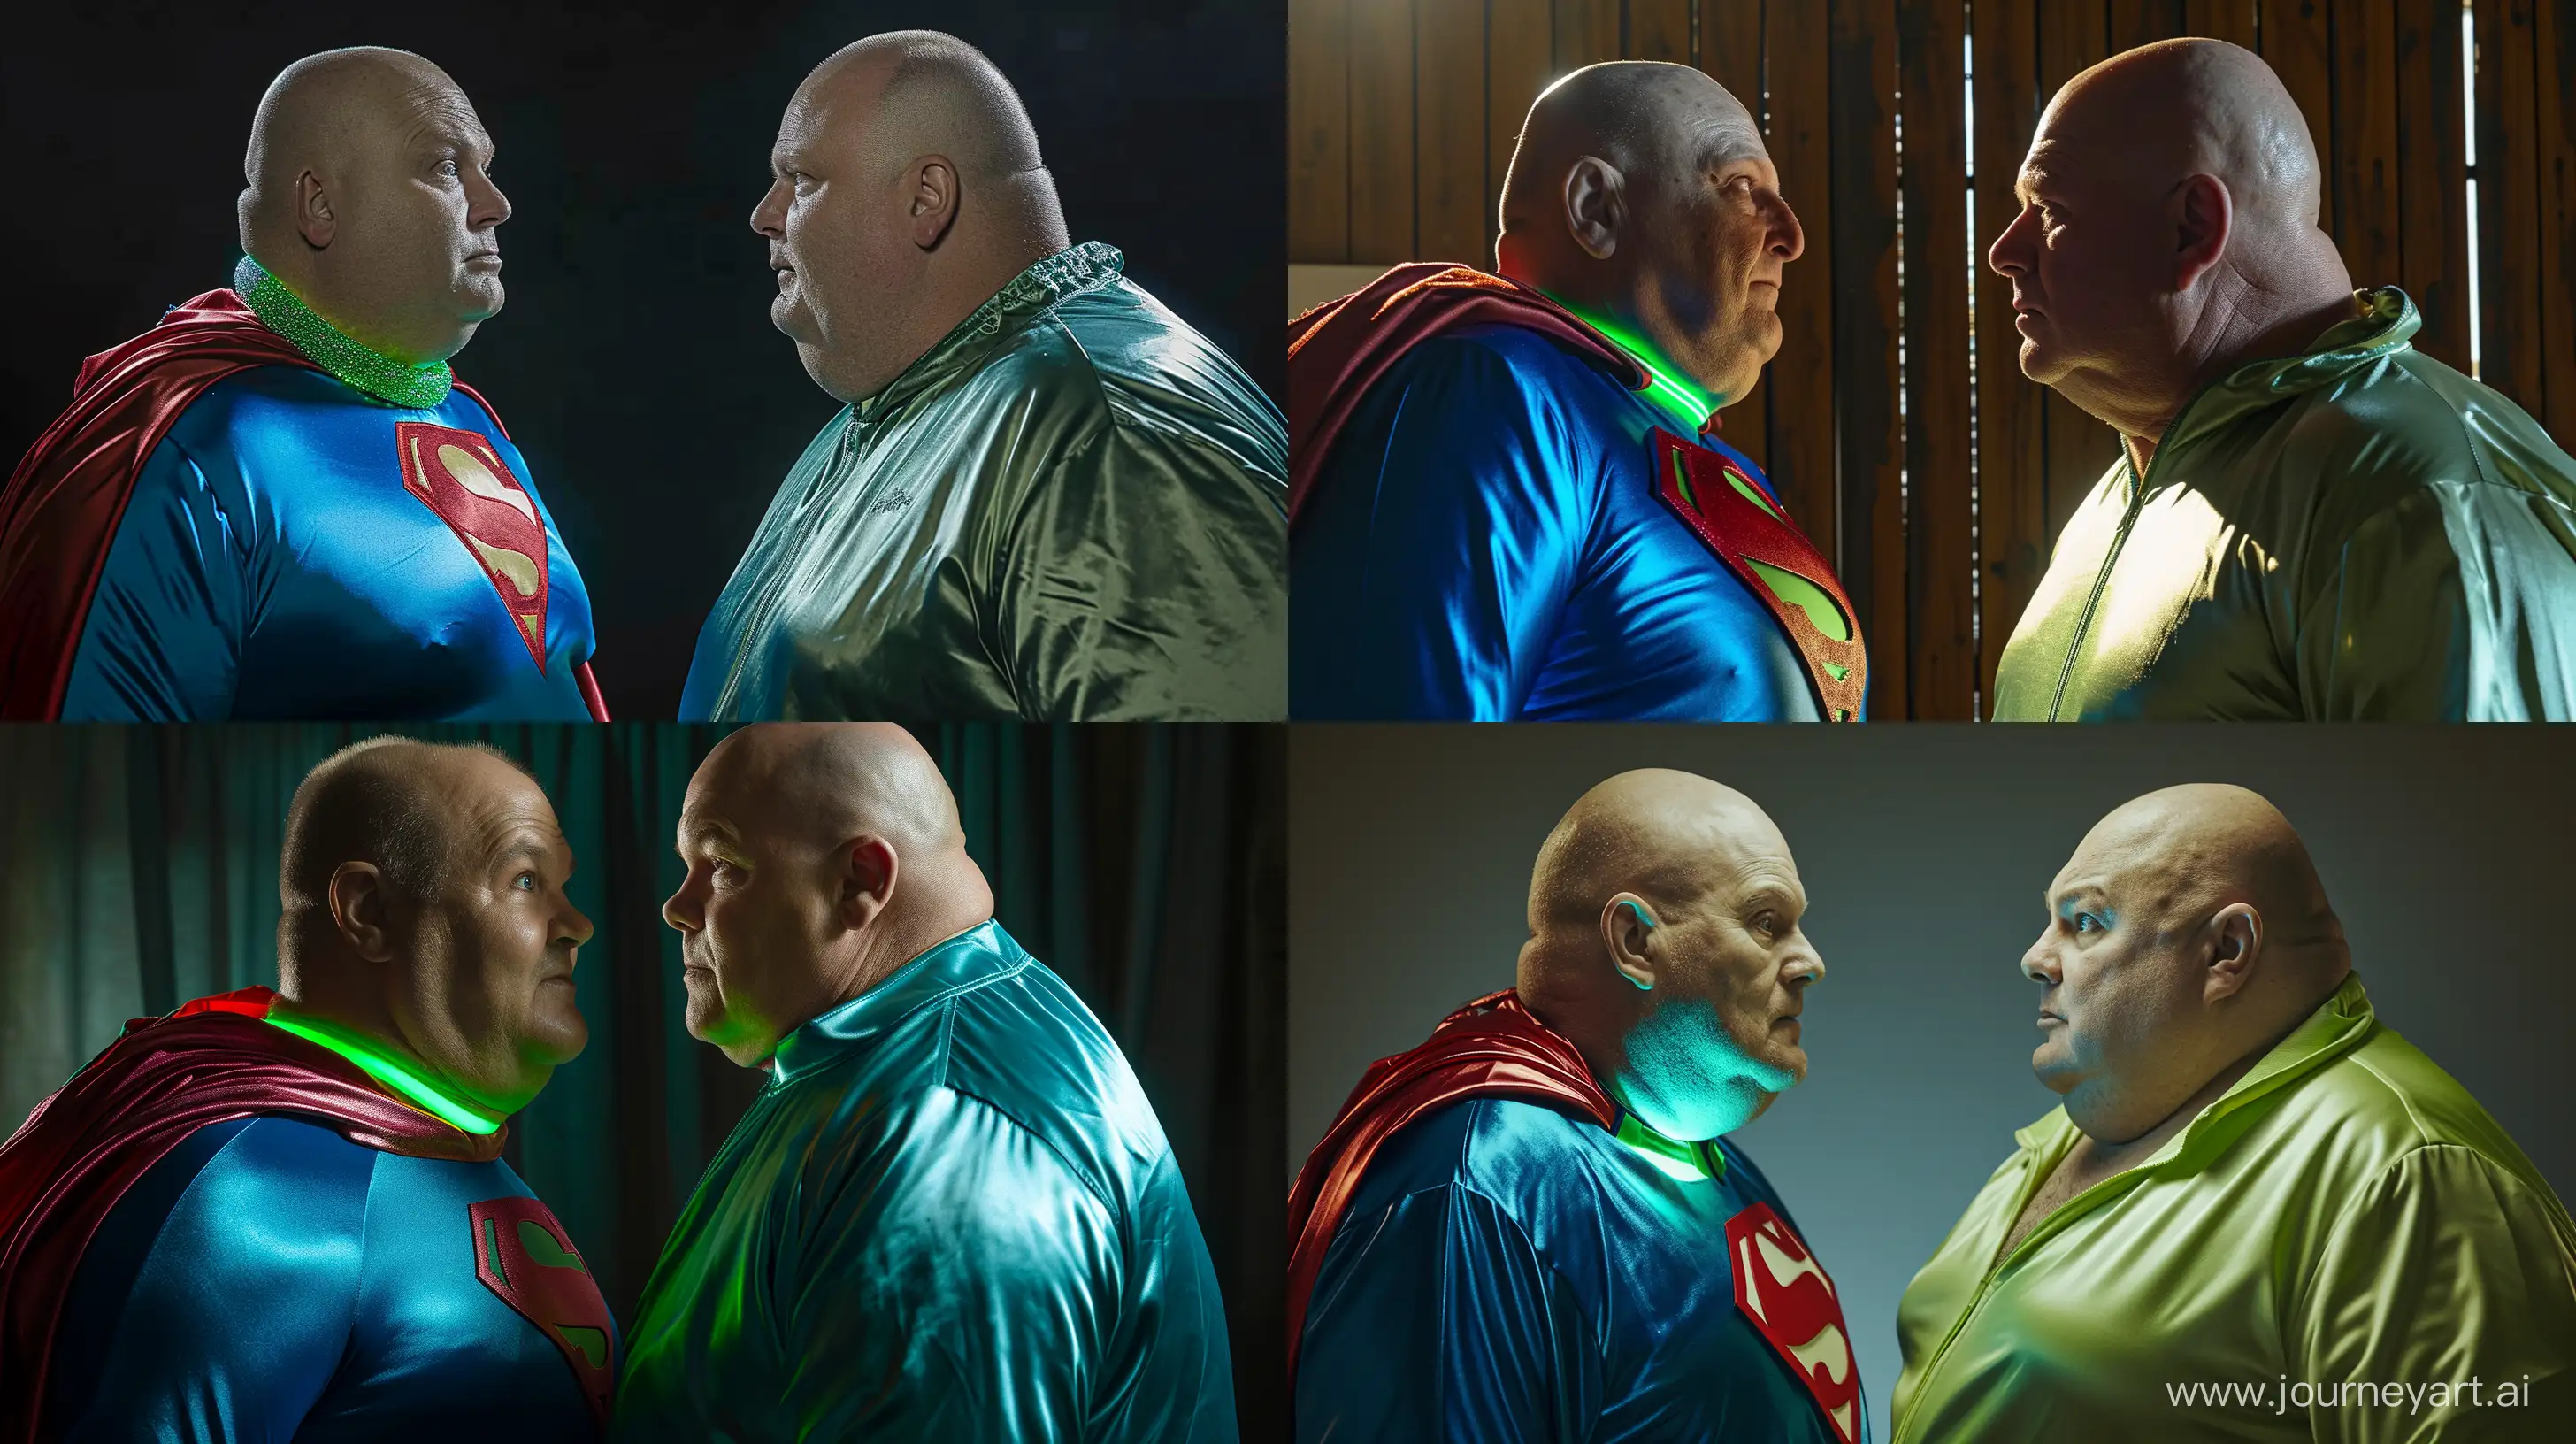 Closeup portrait photo of two men facing each other. The man on the right is a chubby man aged 60 wearing a silky bright green tracksuit jacket. The man on the left is a chubby man aged 60 wearing a blue silky superman costume with a large red cape and a green glowing small short dog collar. Inside. Natural Light. Bald. Clean Shaven. --style raw --ar 16:9 --v 6